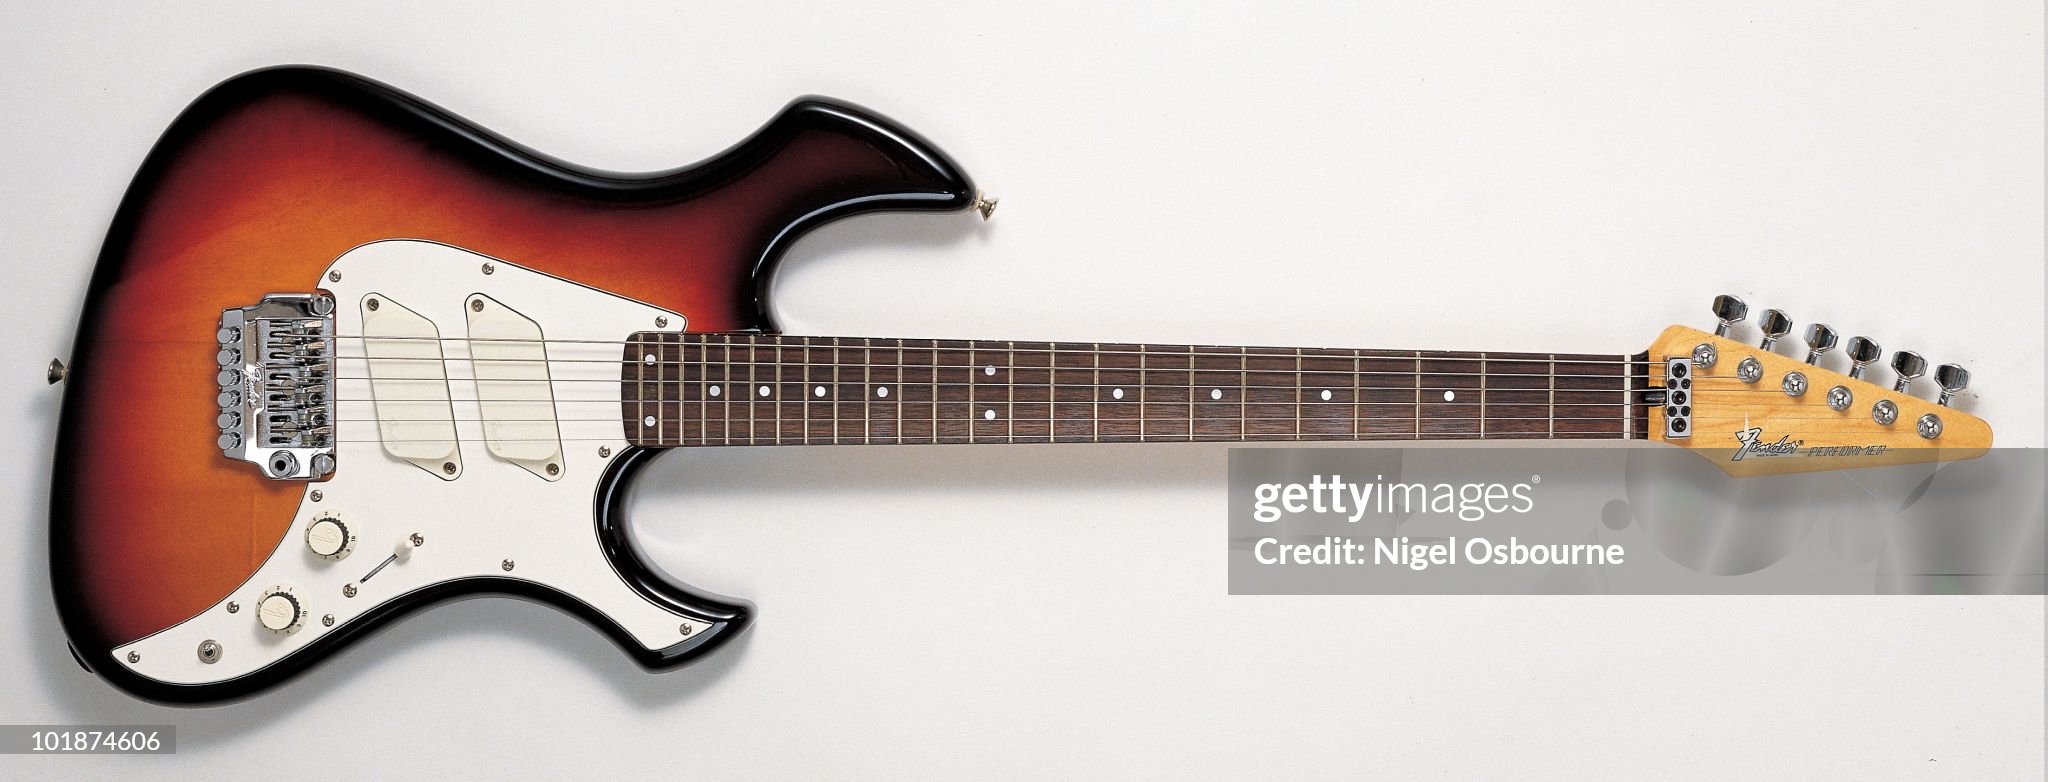 studio-still-life-of-a-1985-fender-performer-guitar-photographed-in-picture-id101874606